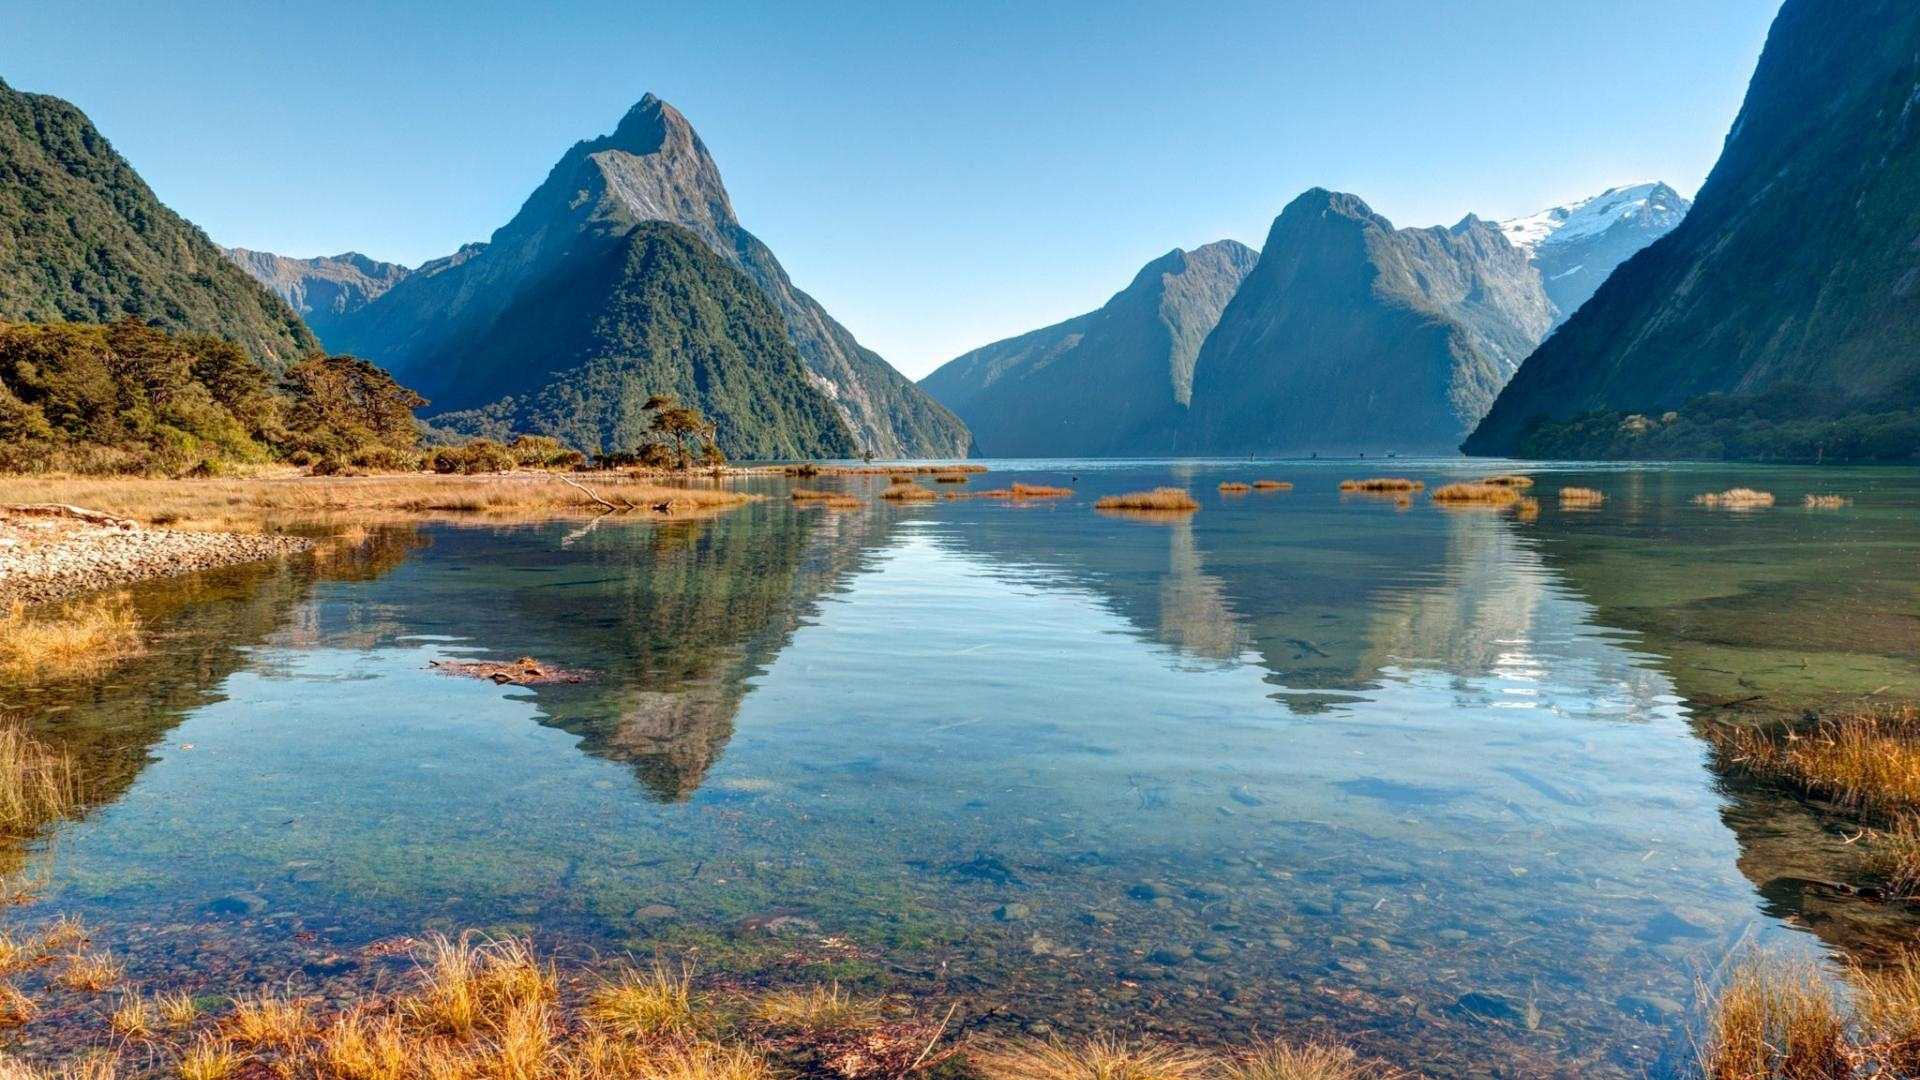 Milford Sound New Zealand Wallpaper HD Download - Top 10